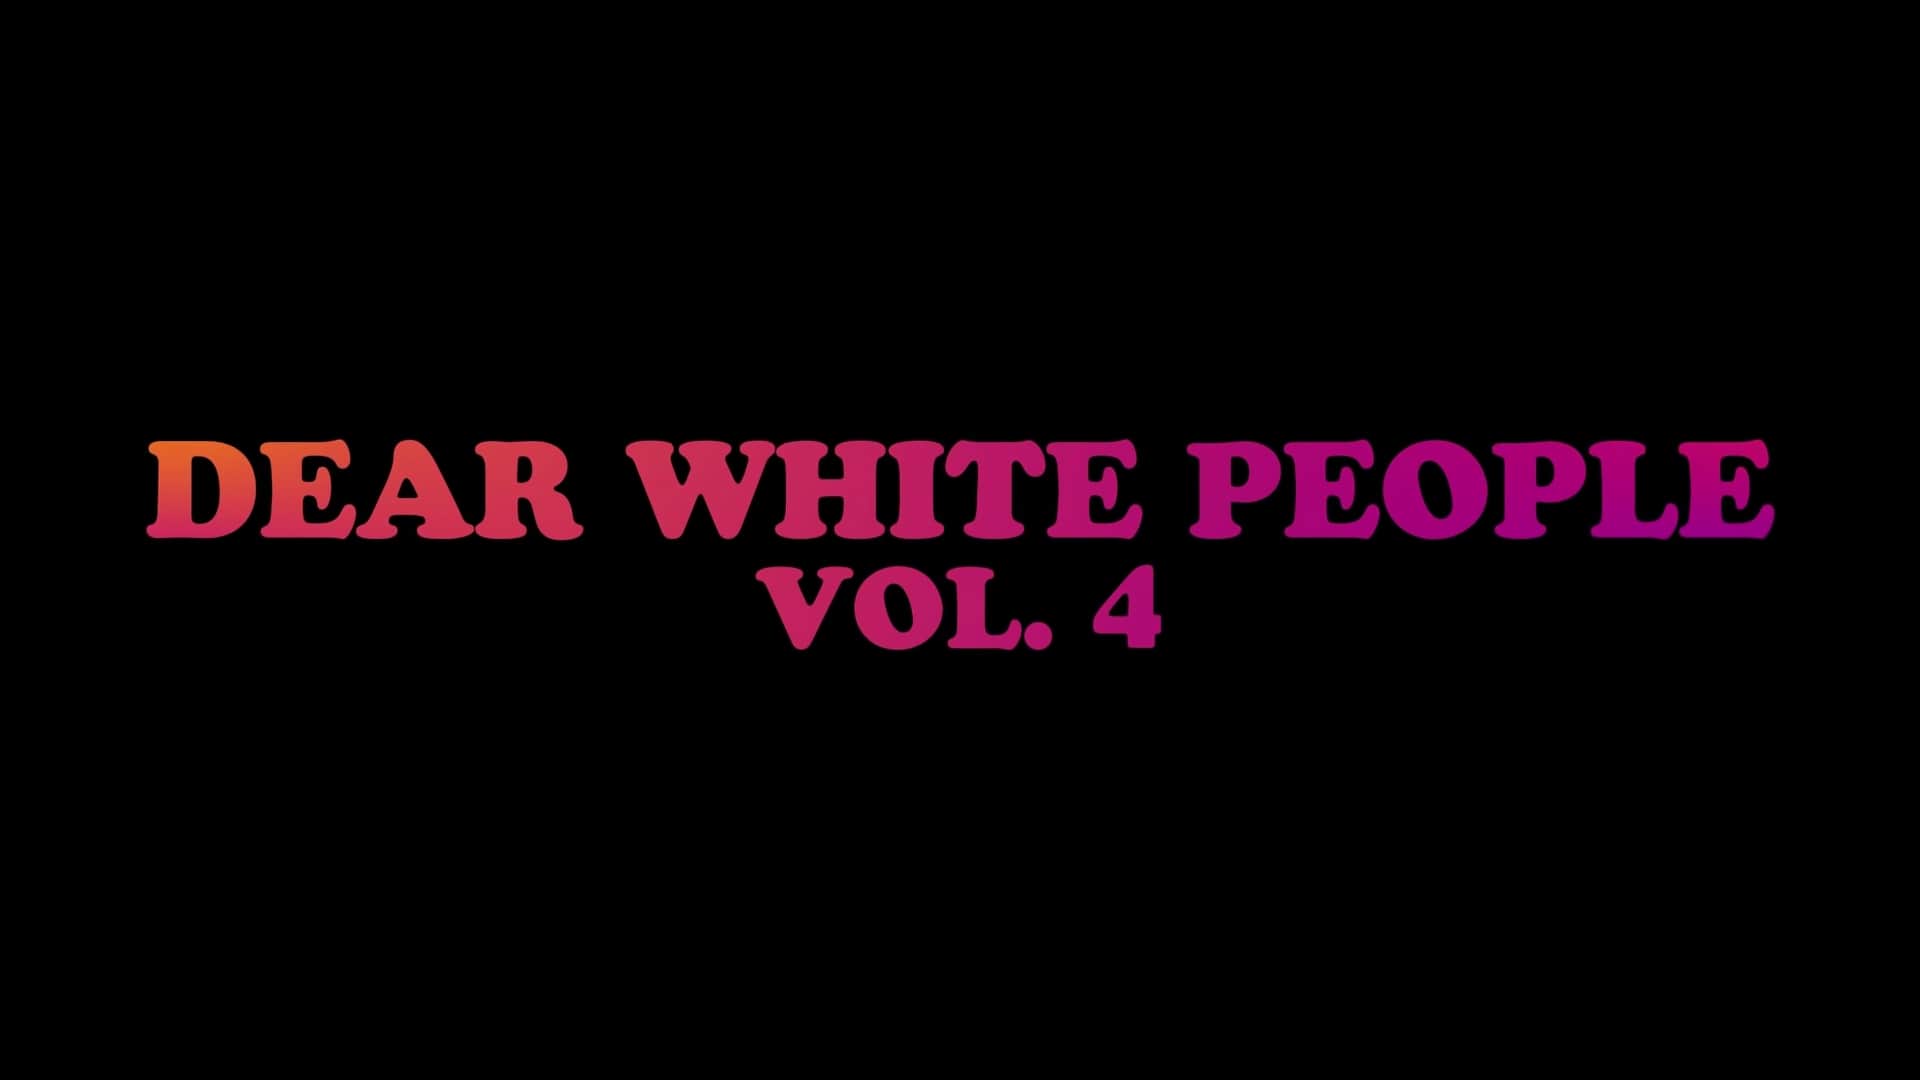 Netflix Dear White People Vol 4 Trailer, Coming to Netflix in September 2021